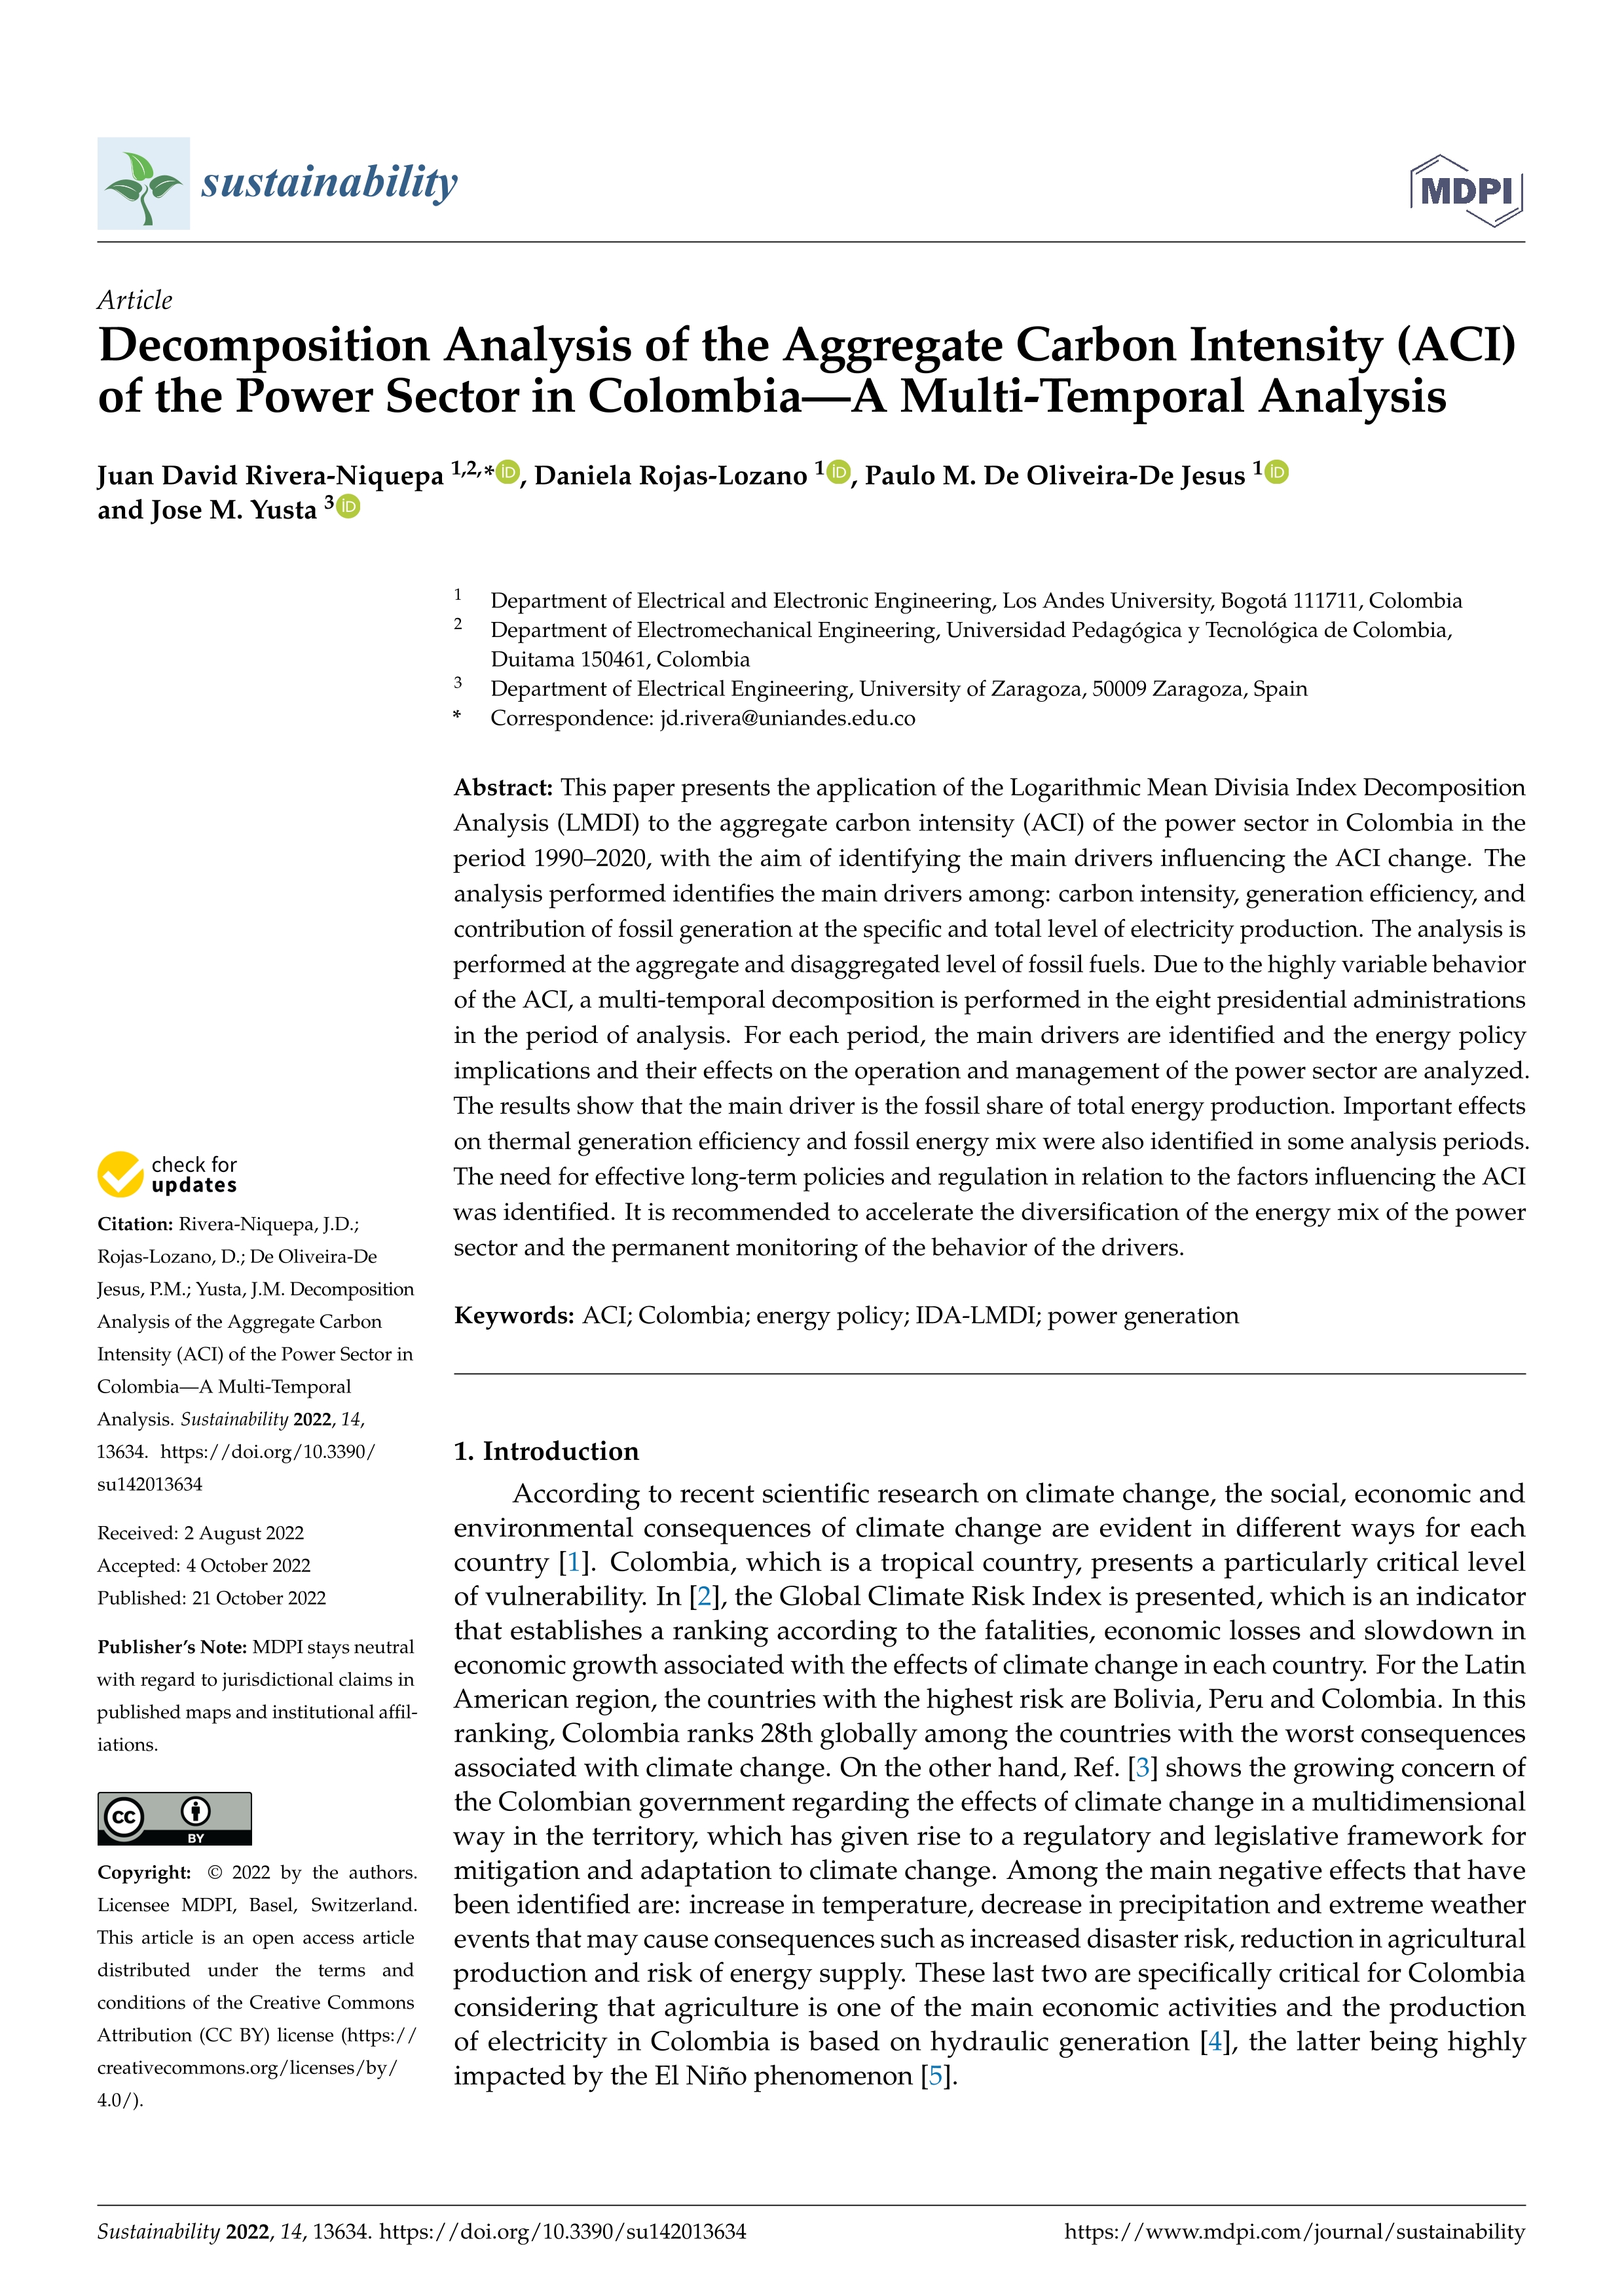 Decomposition Analysis of the Aggregate Carbon Intensity (ACI) of the Power Sector in Colombia—A Multi-Temporal Analysis